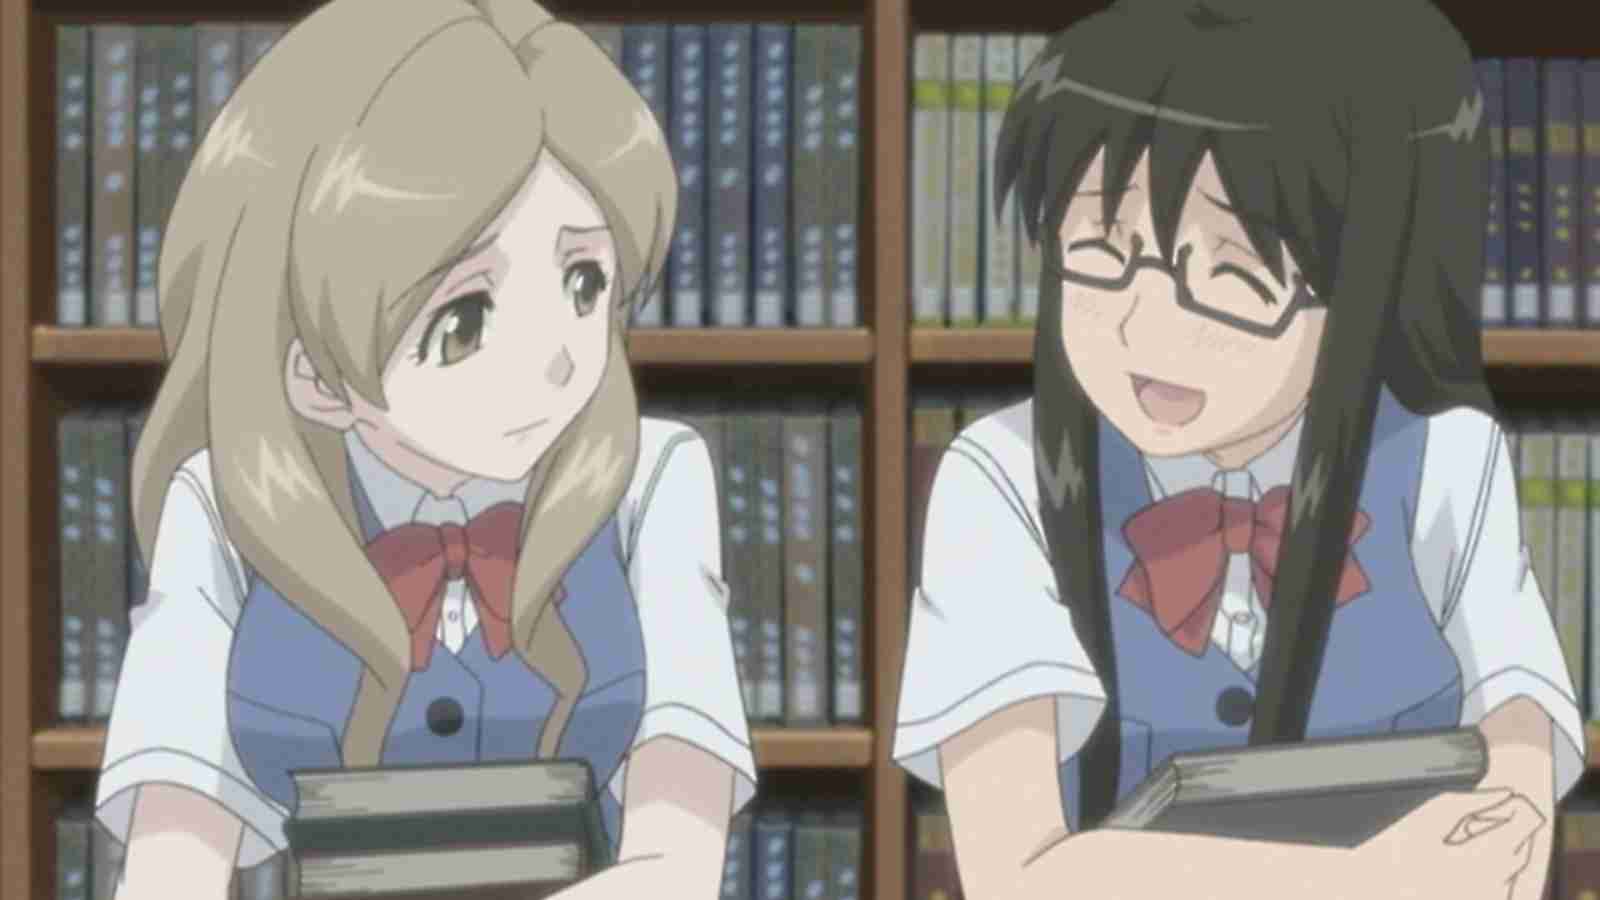 School Anime Lesbian - Top 8 LGBTQ Anime Series And Where To Watch Them - First Curiosity